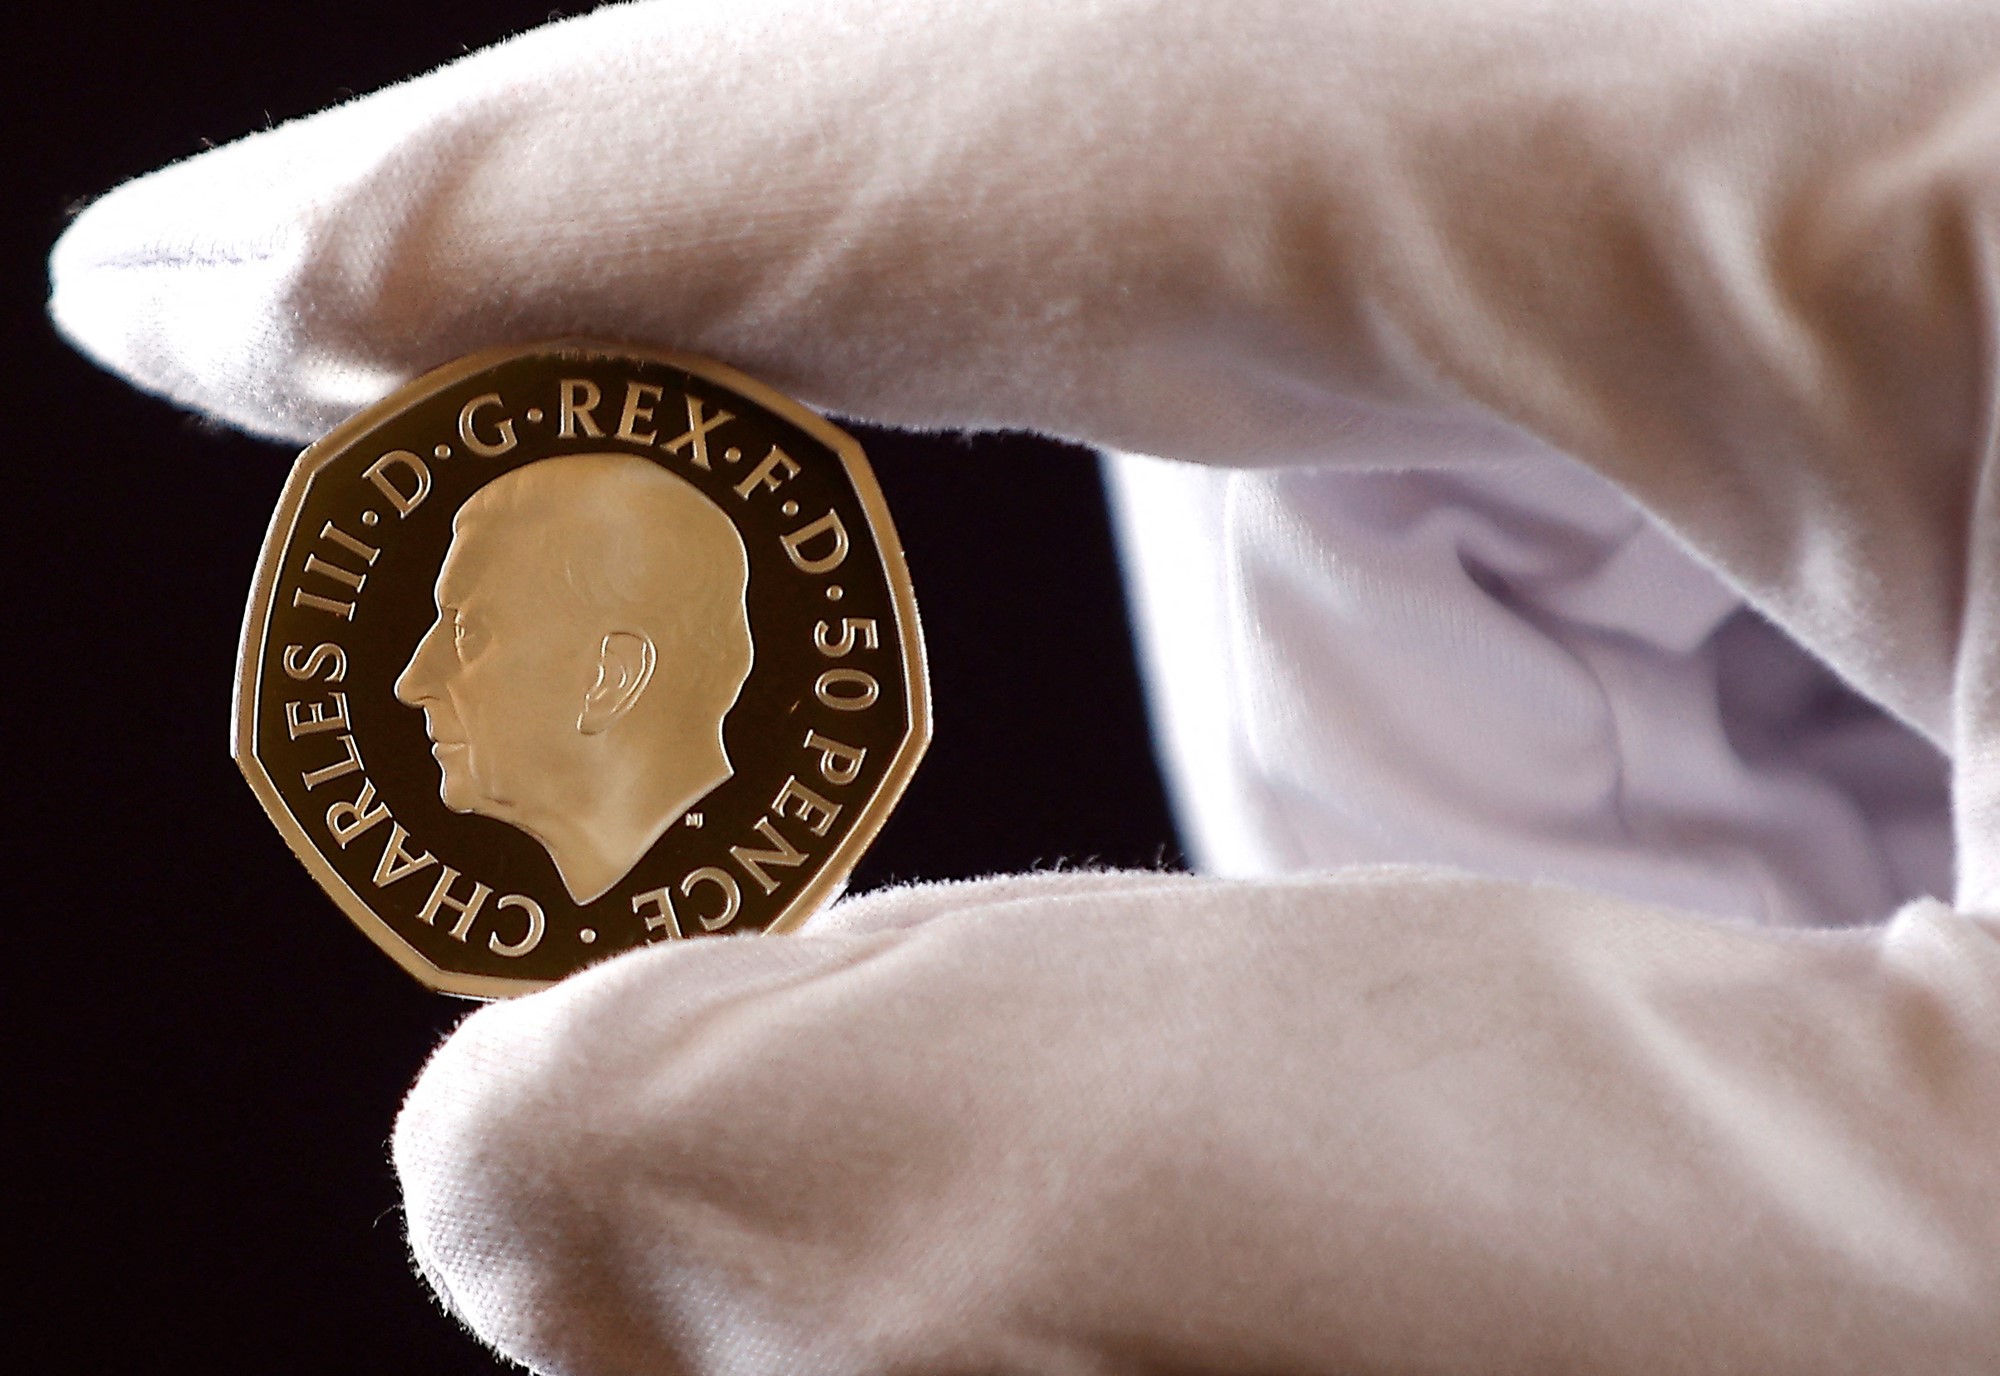 A coin featuring the side image of King Charles is held between a thumb and index finger.